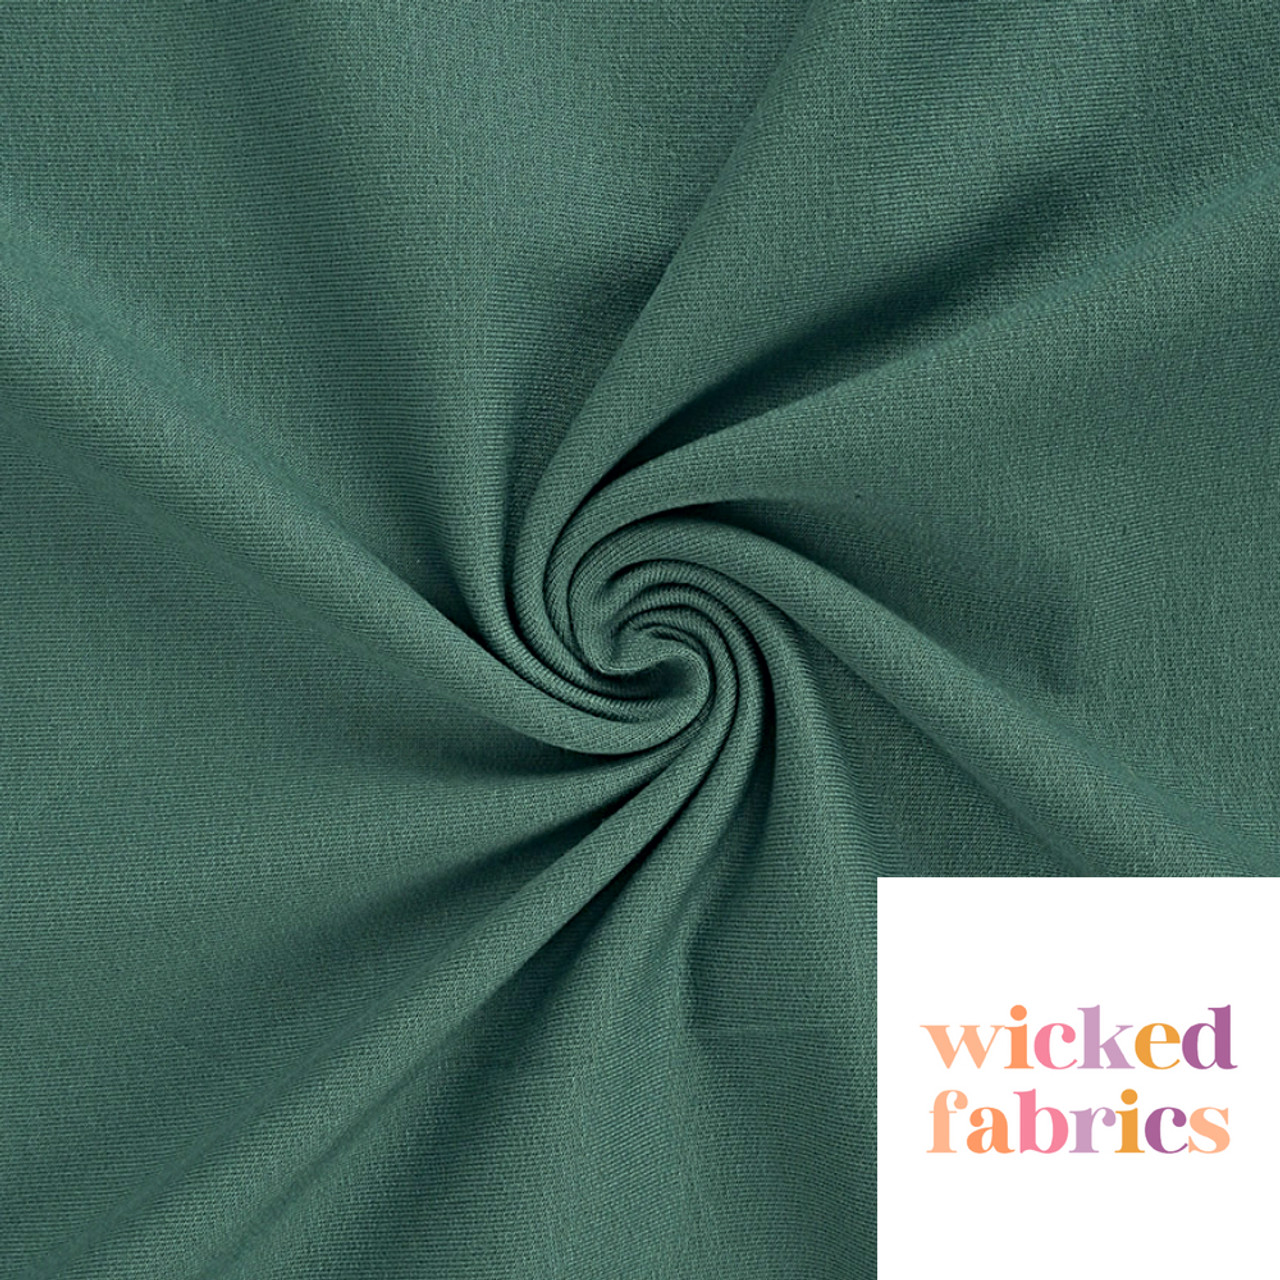 https://cdn11.bigcommerce.com/s-4co0ad/images/stencil/1280x1280/products/4252/13783/Viscose_Elastane_Jersey_in_Pine_Green_-_Wicked_Fabrics__71178.1695028333.jpg?c=2